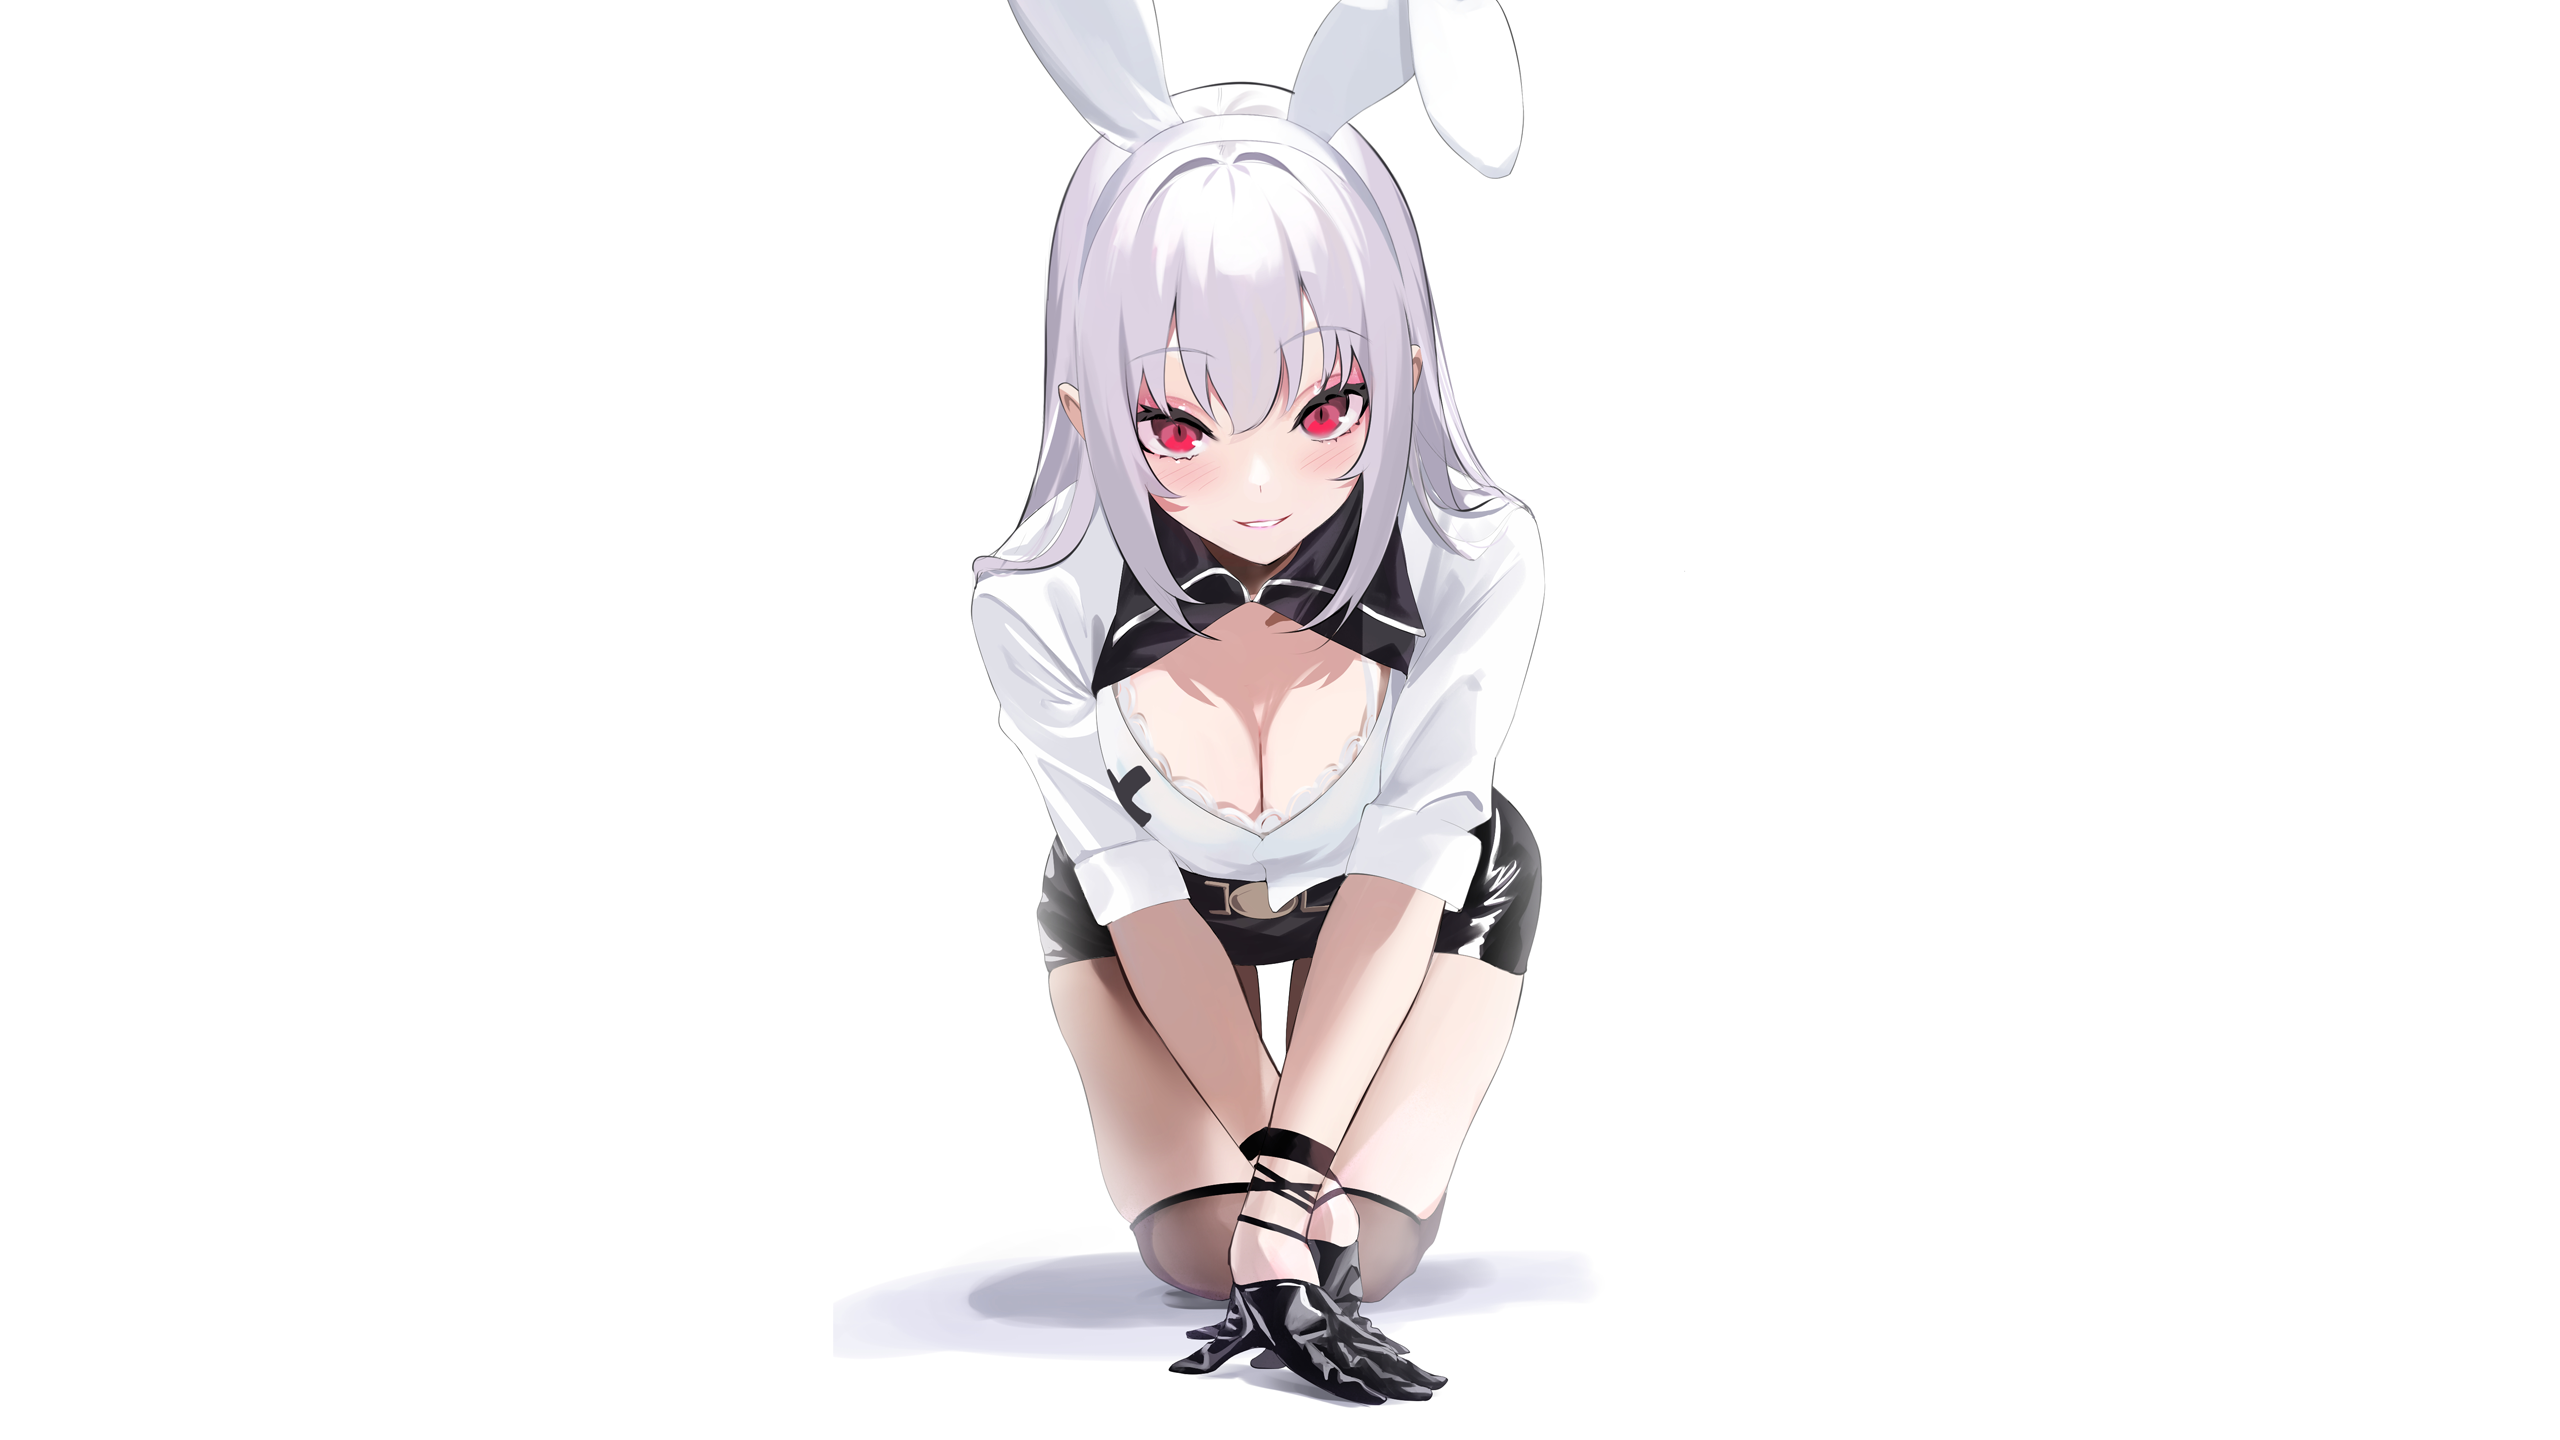 Anime 2560x1440 anime anime girls simple background bunny girl bunny ears cleavage boobs thighs miniskirt blushing Spider Apple white background red eyes frontal view bent over kneeling smiling